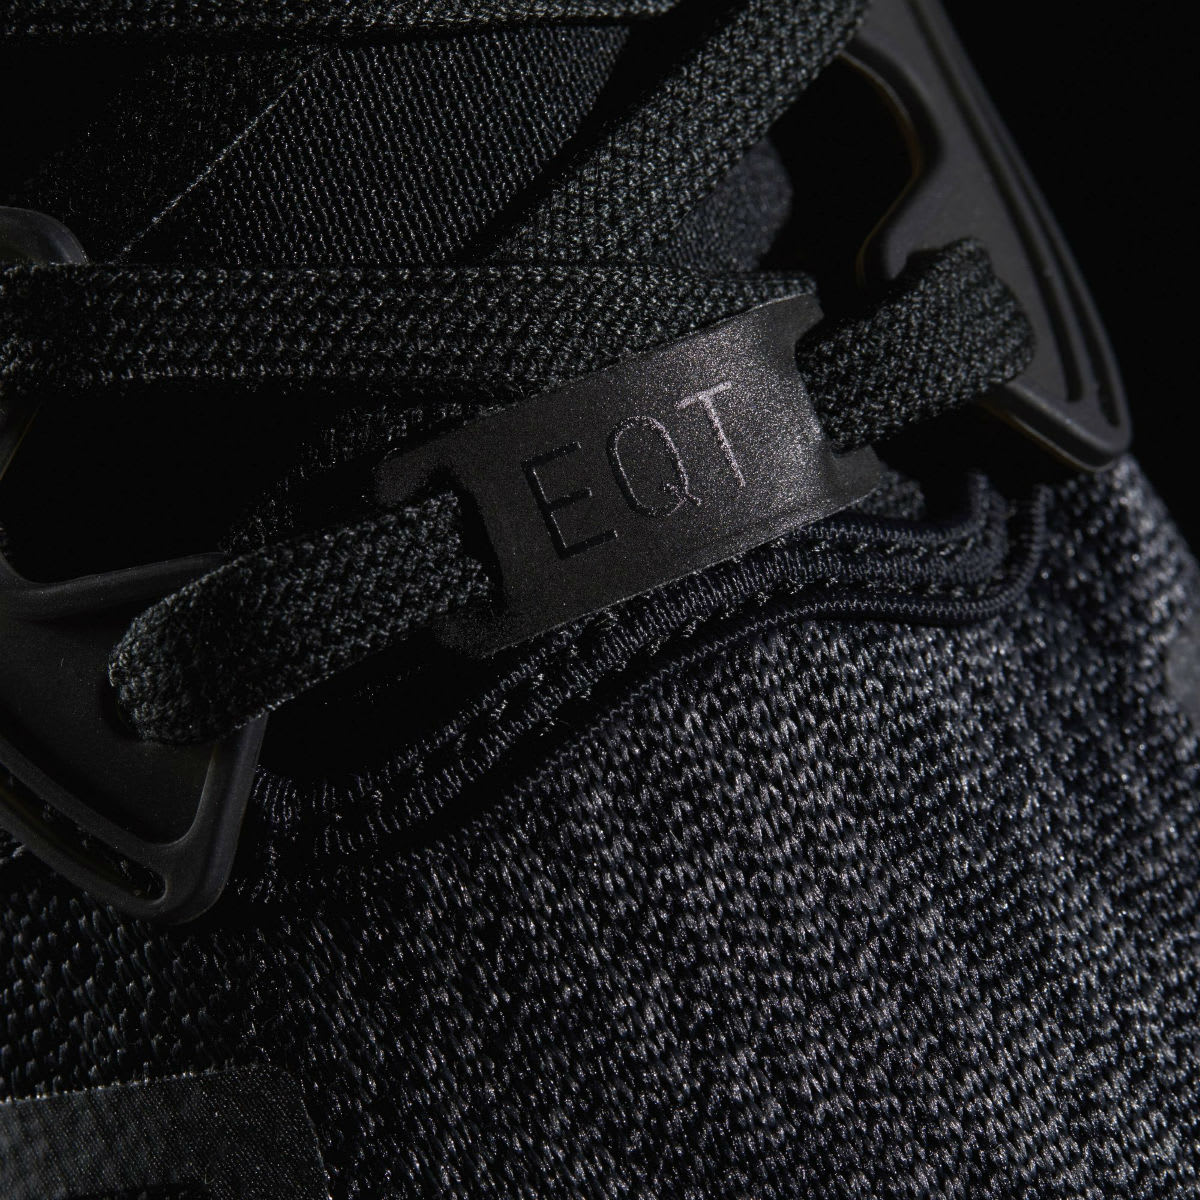 Adidas EQT Cushion ADV Black Friday Release Date Toe BY9507